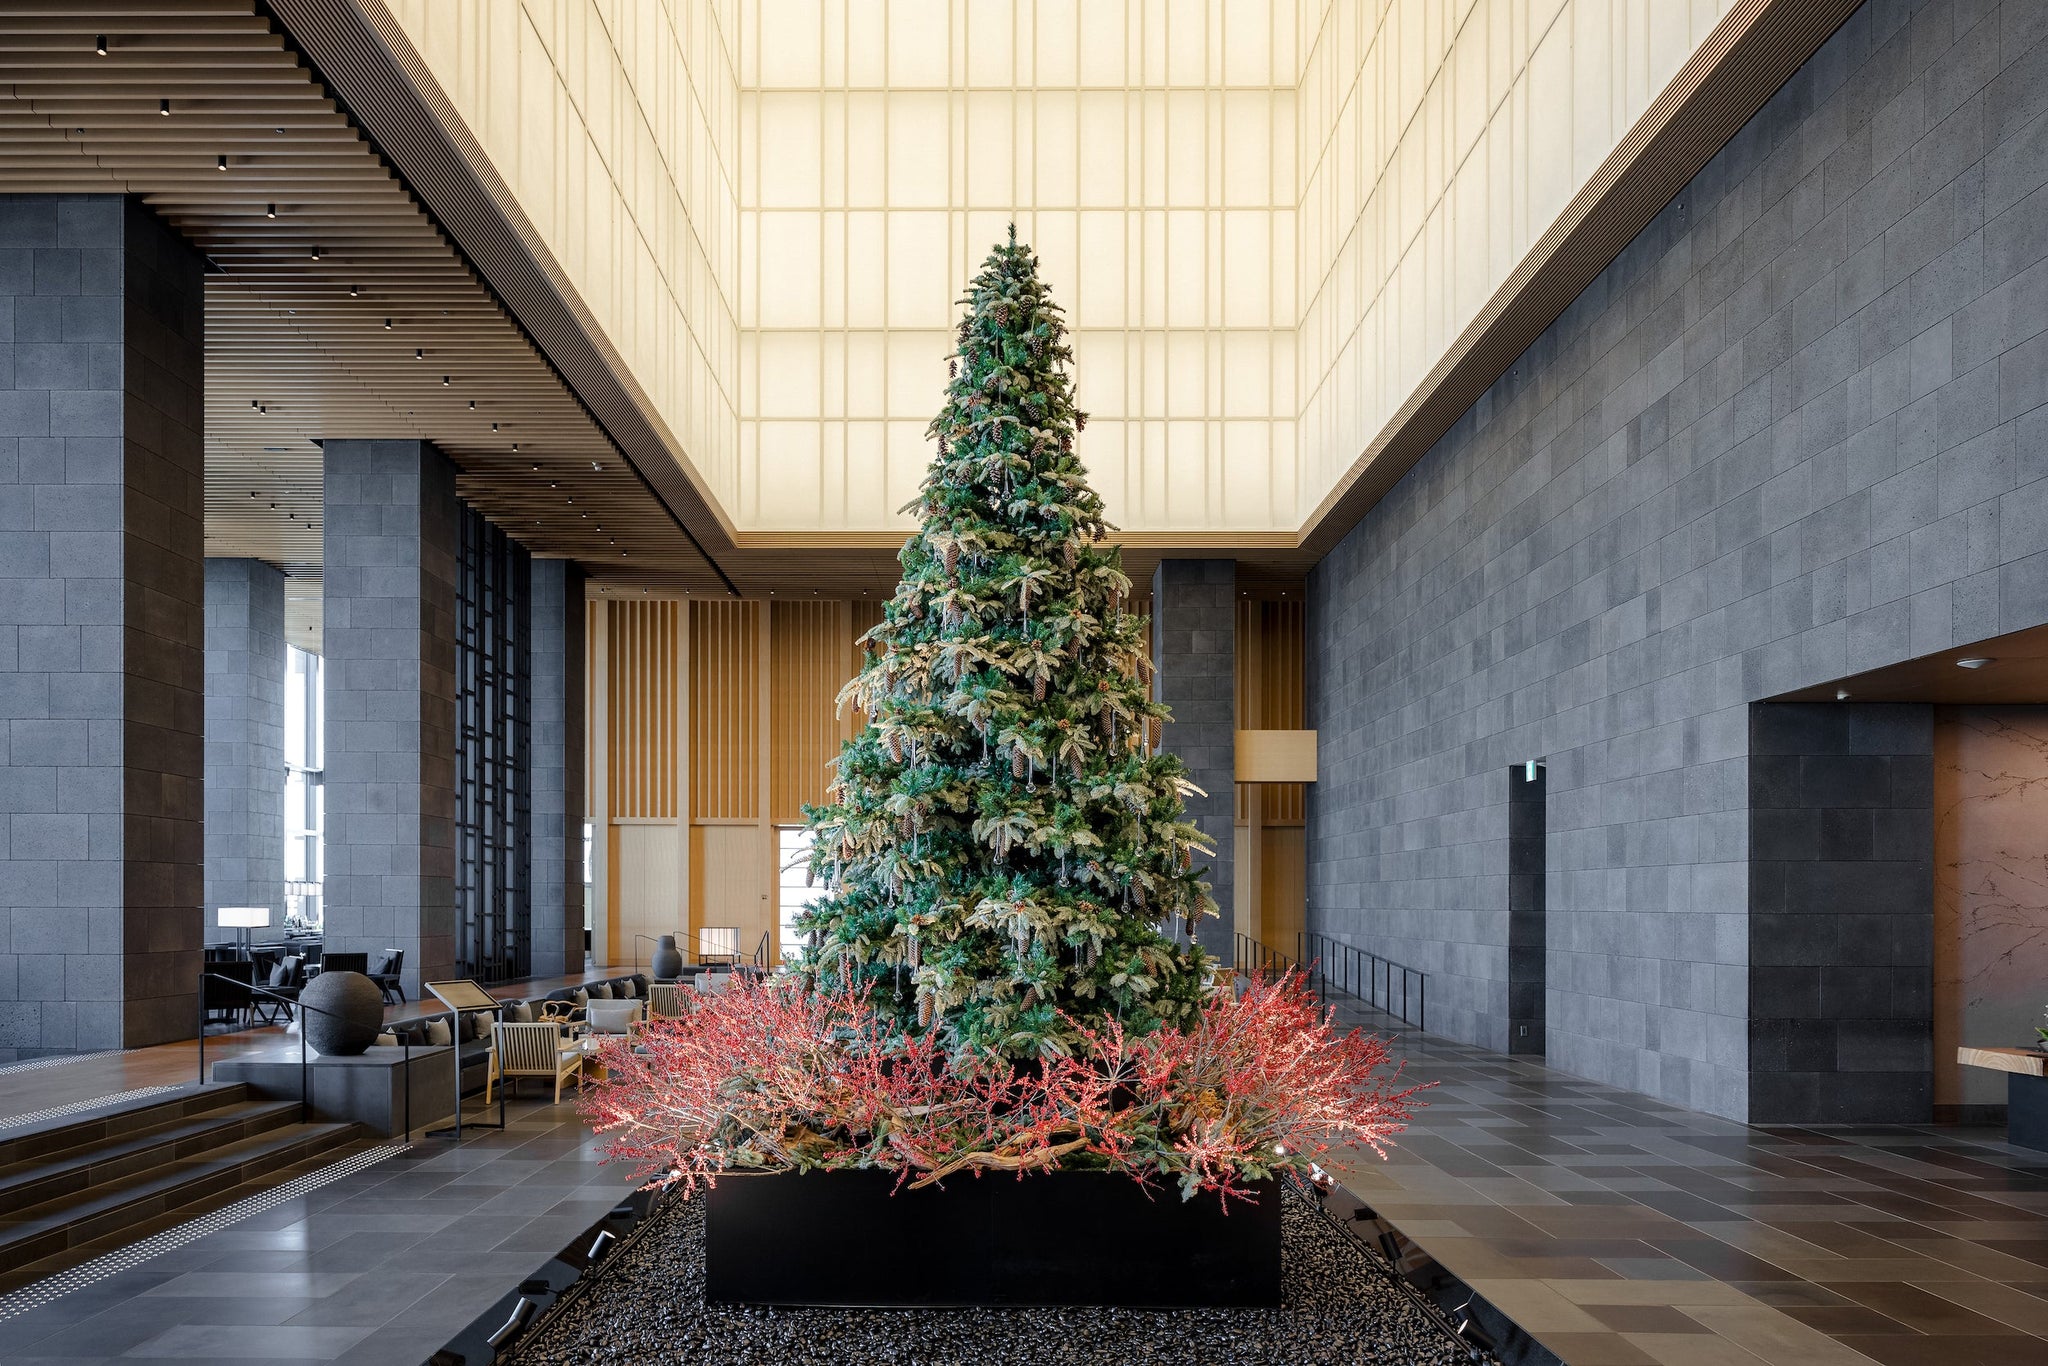 10 Great Hotels for Christmas - GLOBE-TROTTER